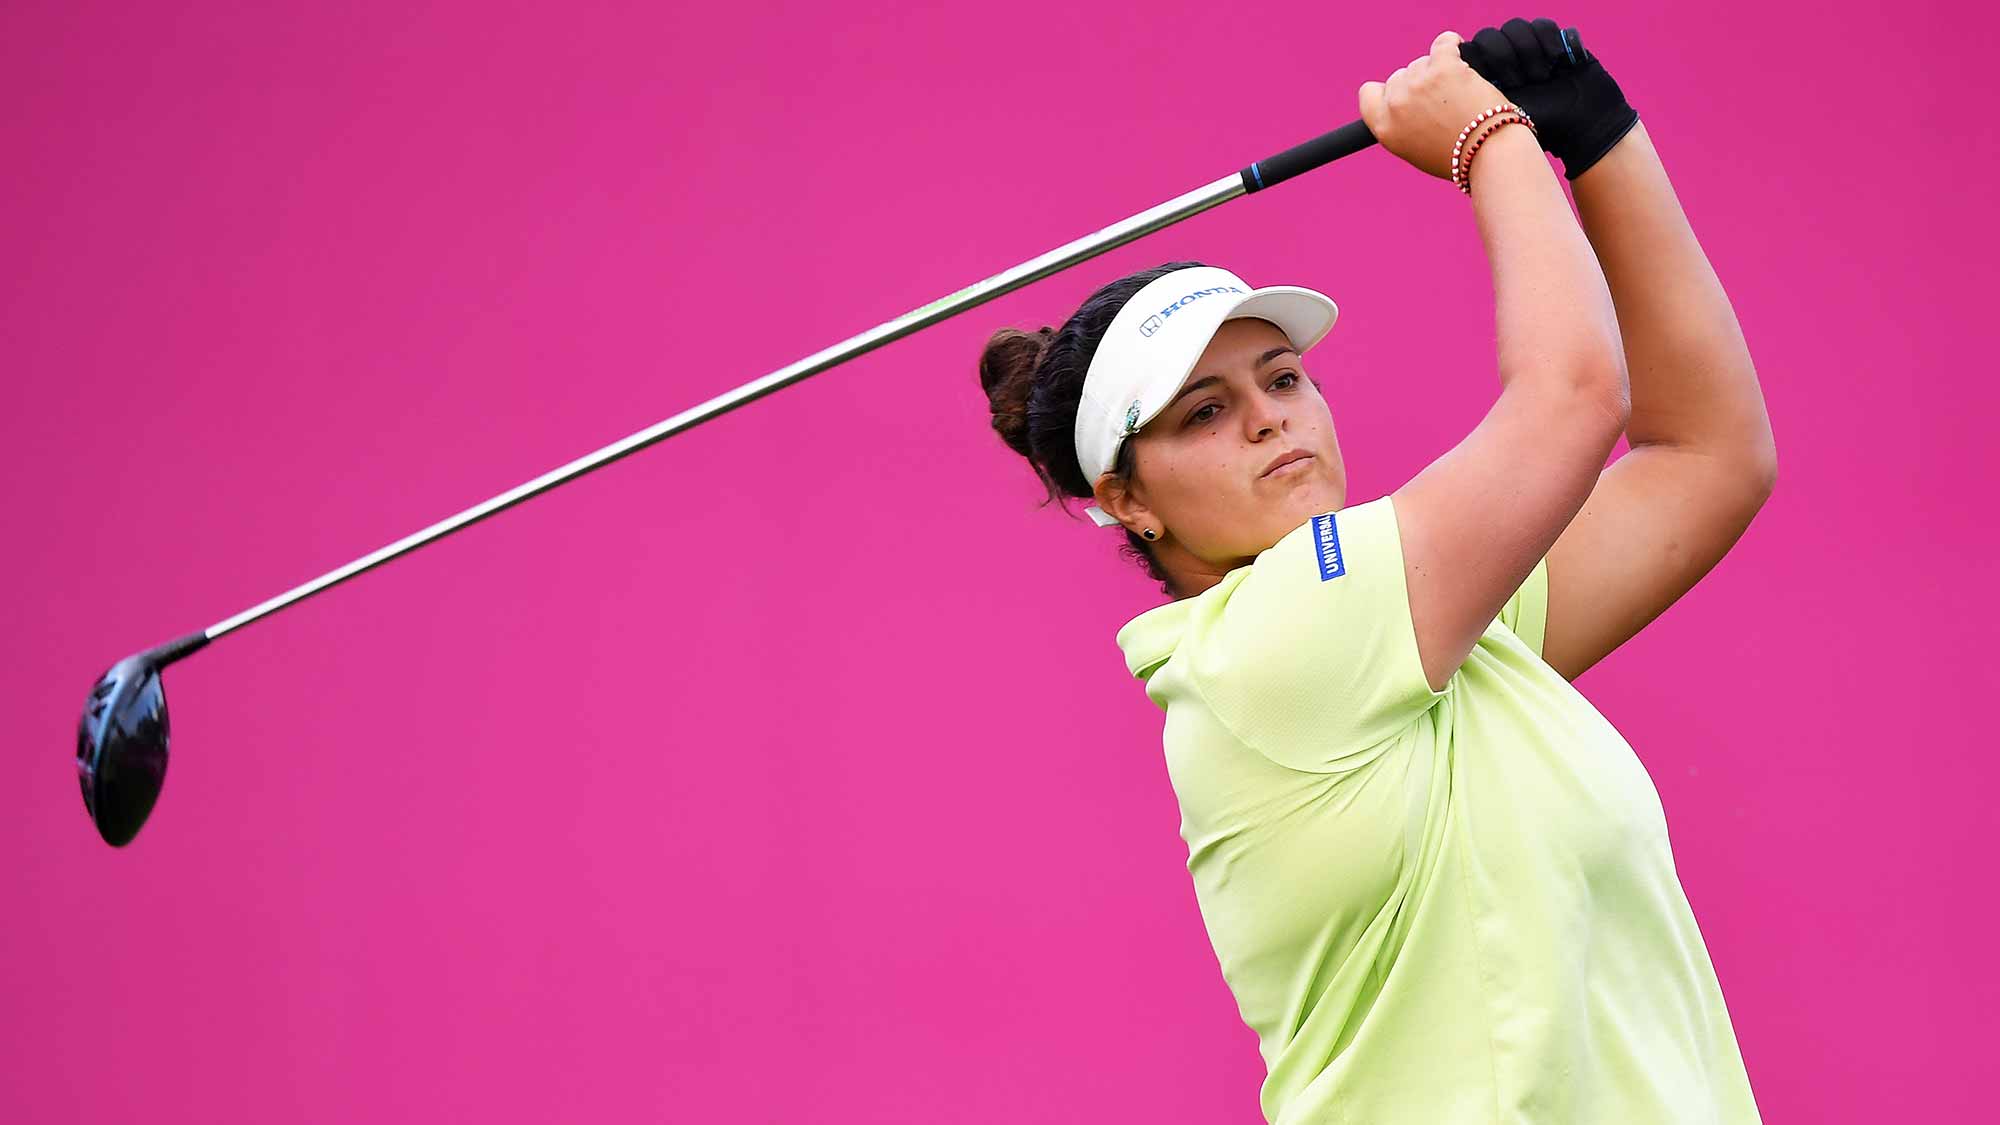 Maria Torres of Puerto Rico tees off during day two of the Evian Championship at Evian Resort Golf Club on September 14, 2018 in Evian-les-Bains, France